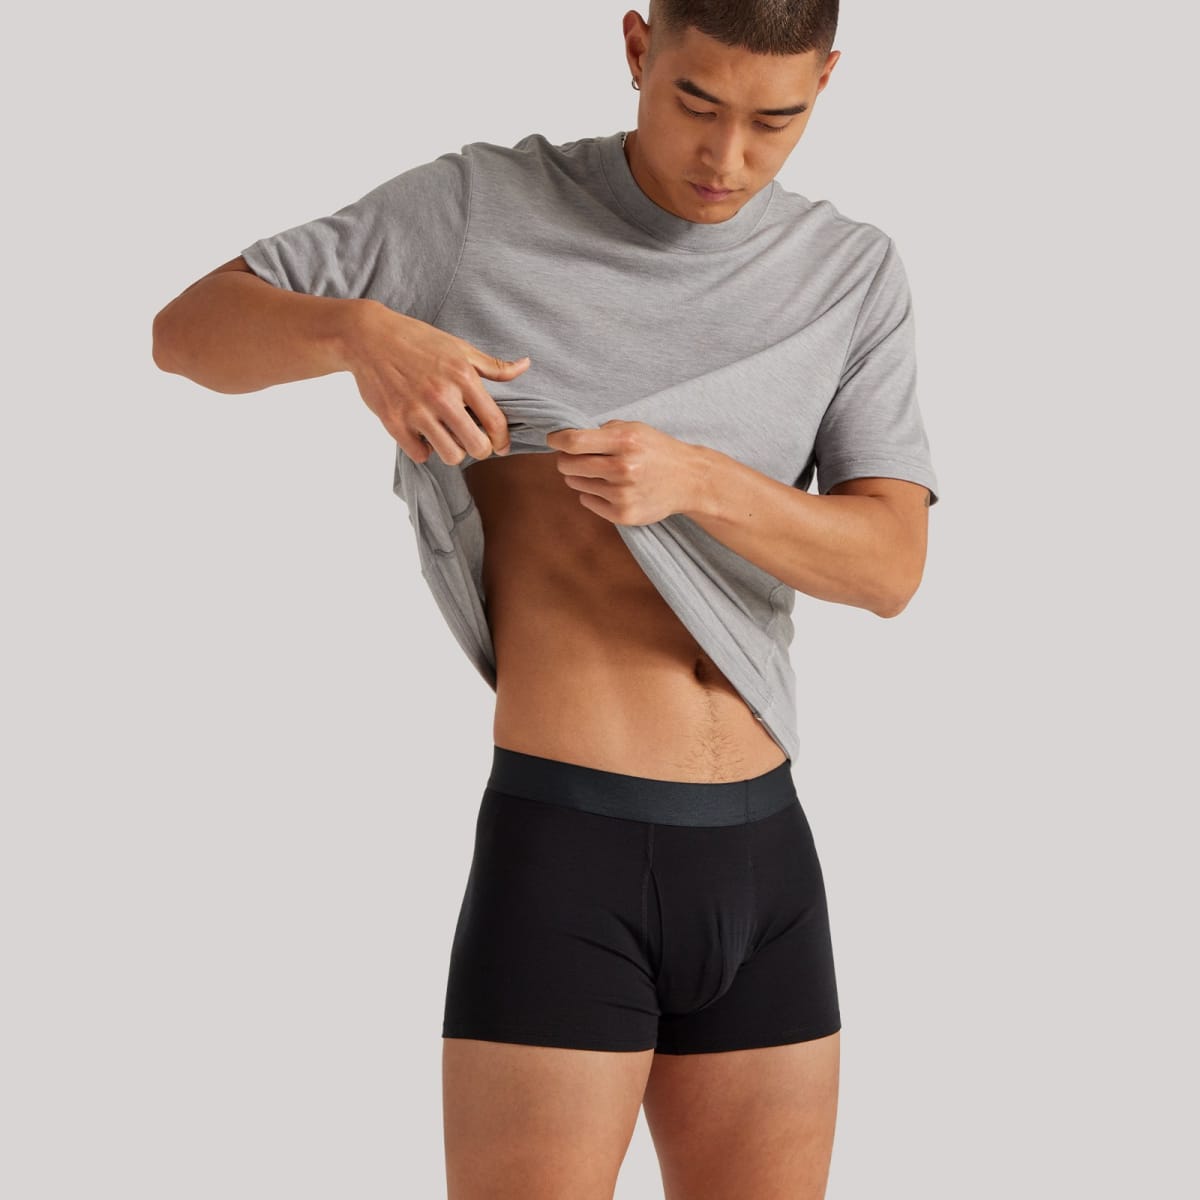 7 sustainable and ethical brands for merino underwear